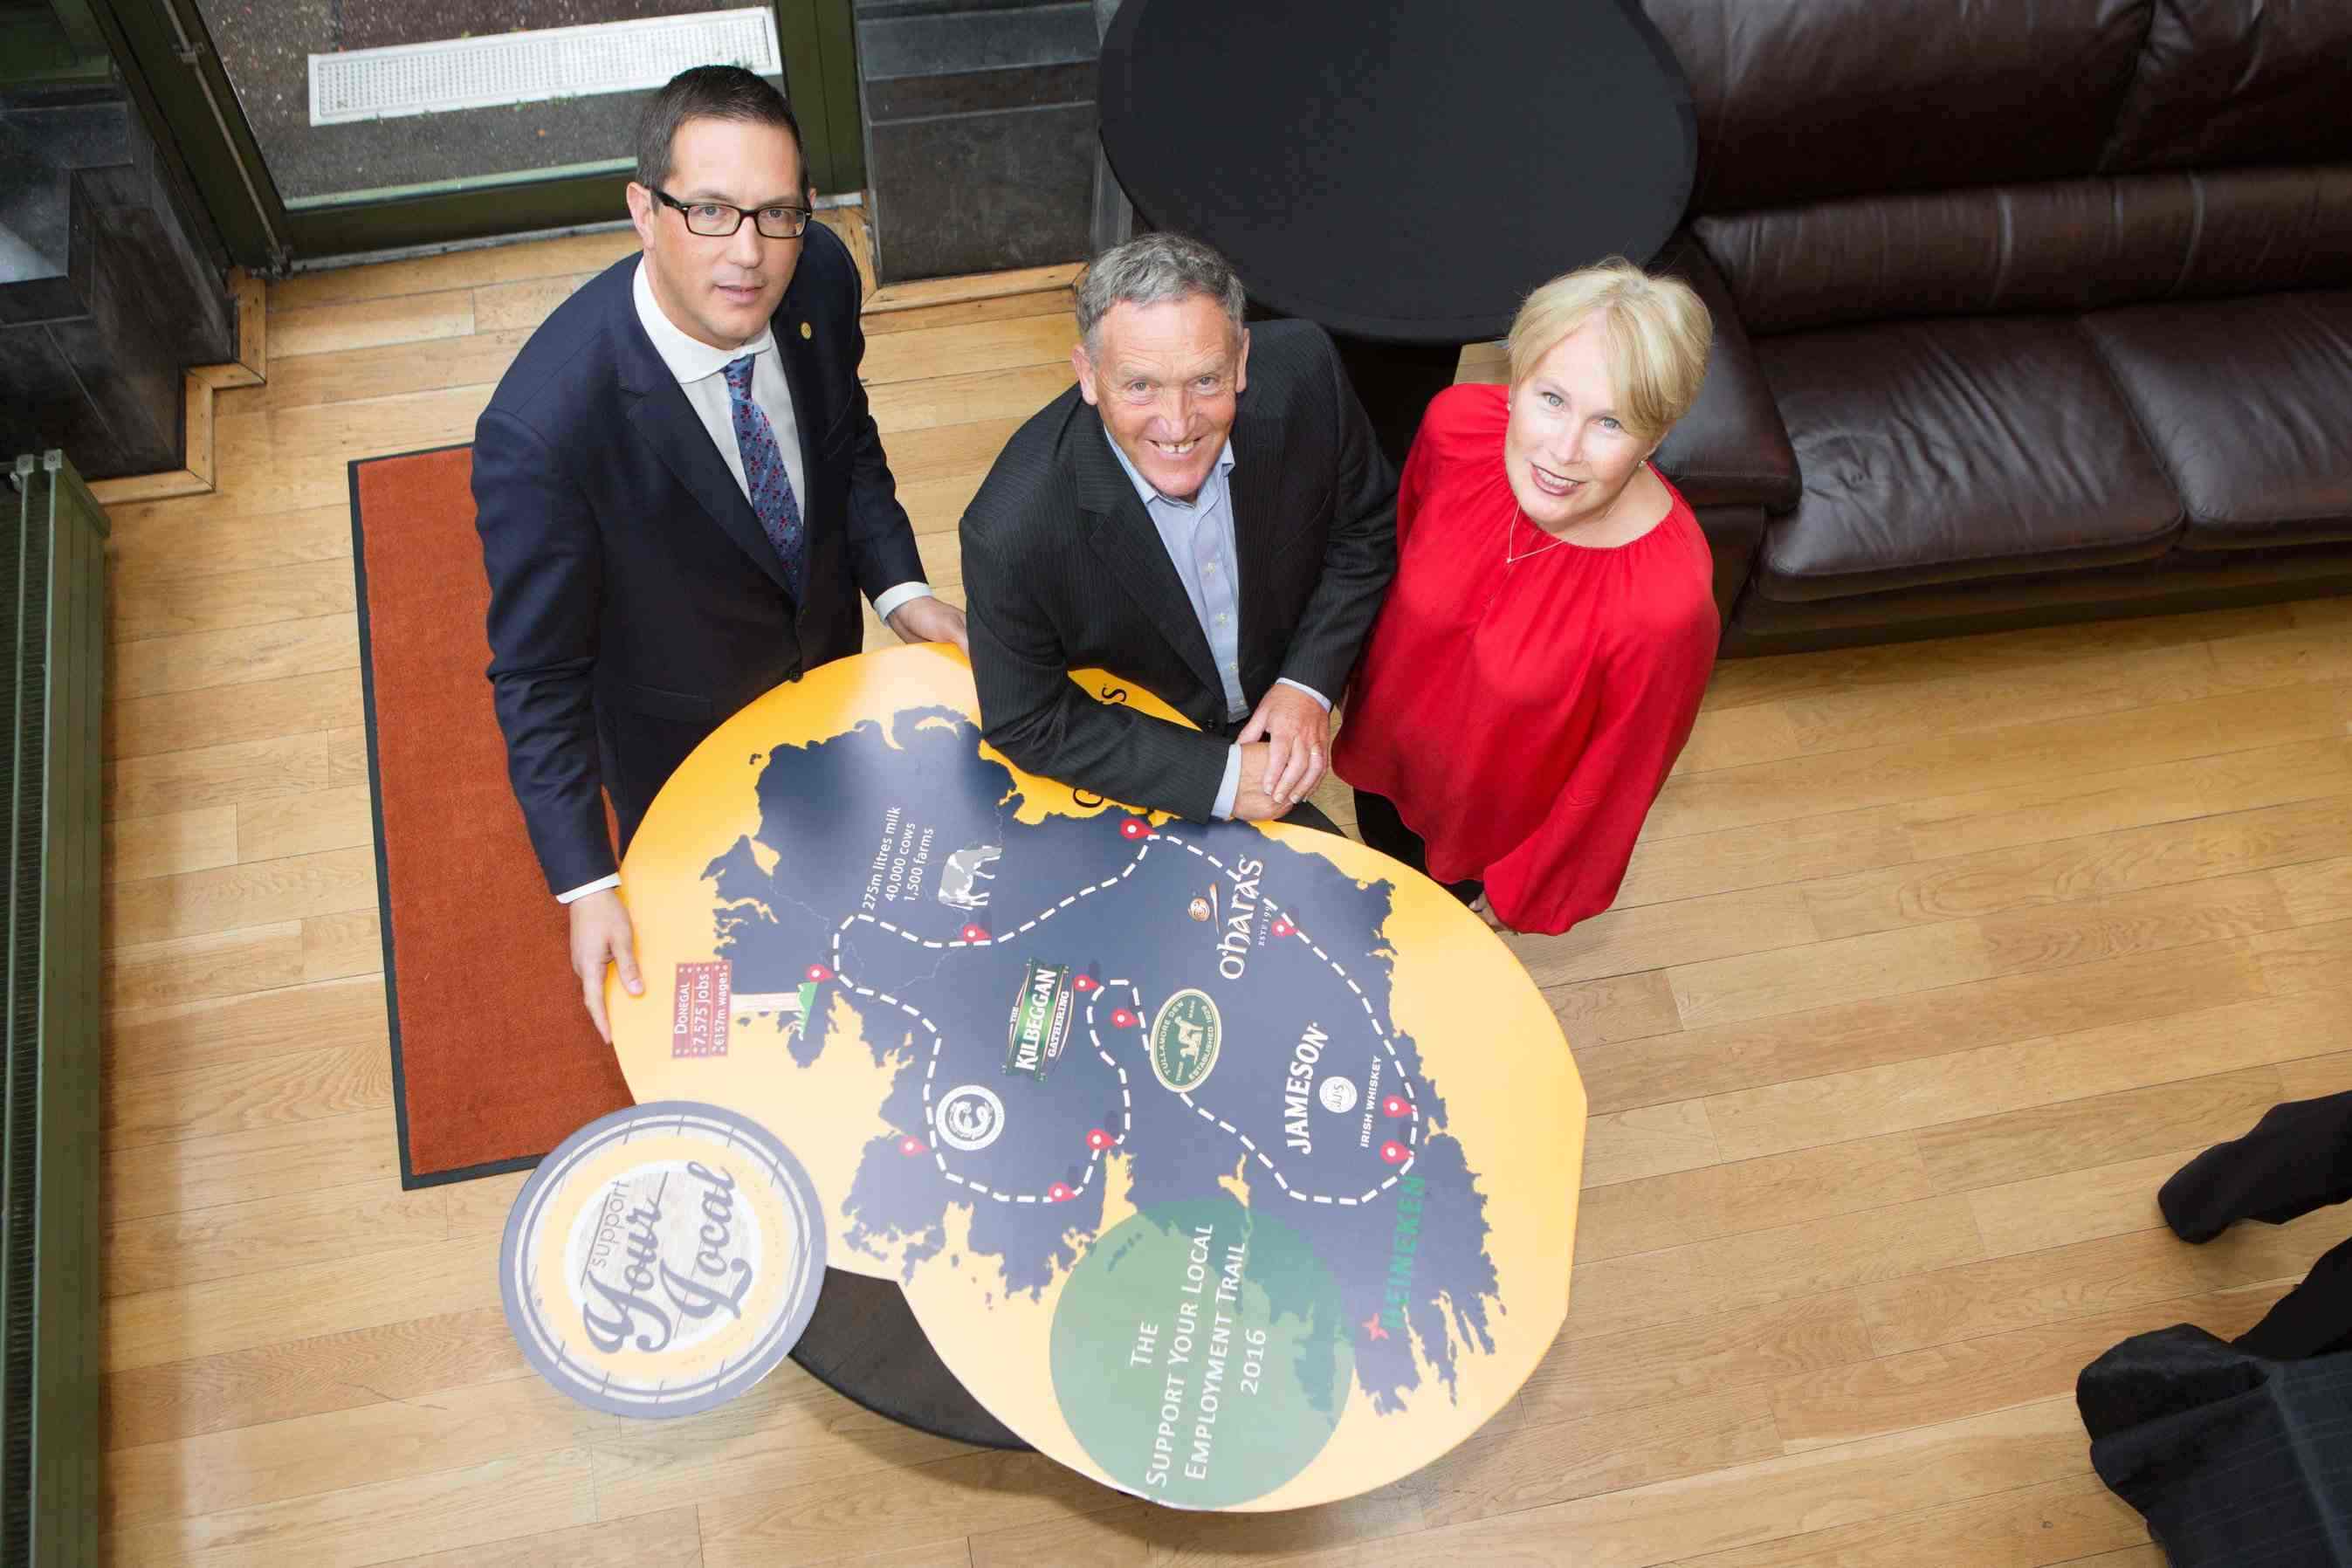 From left: Cork Chamber Chief Executive Conor Healy with report author Tony Foley and DIGI Chair and Chief Executive of Heineken Ireland Maggie Timmoney at the launch of today’s employment trail map in Heineken Ireland.